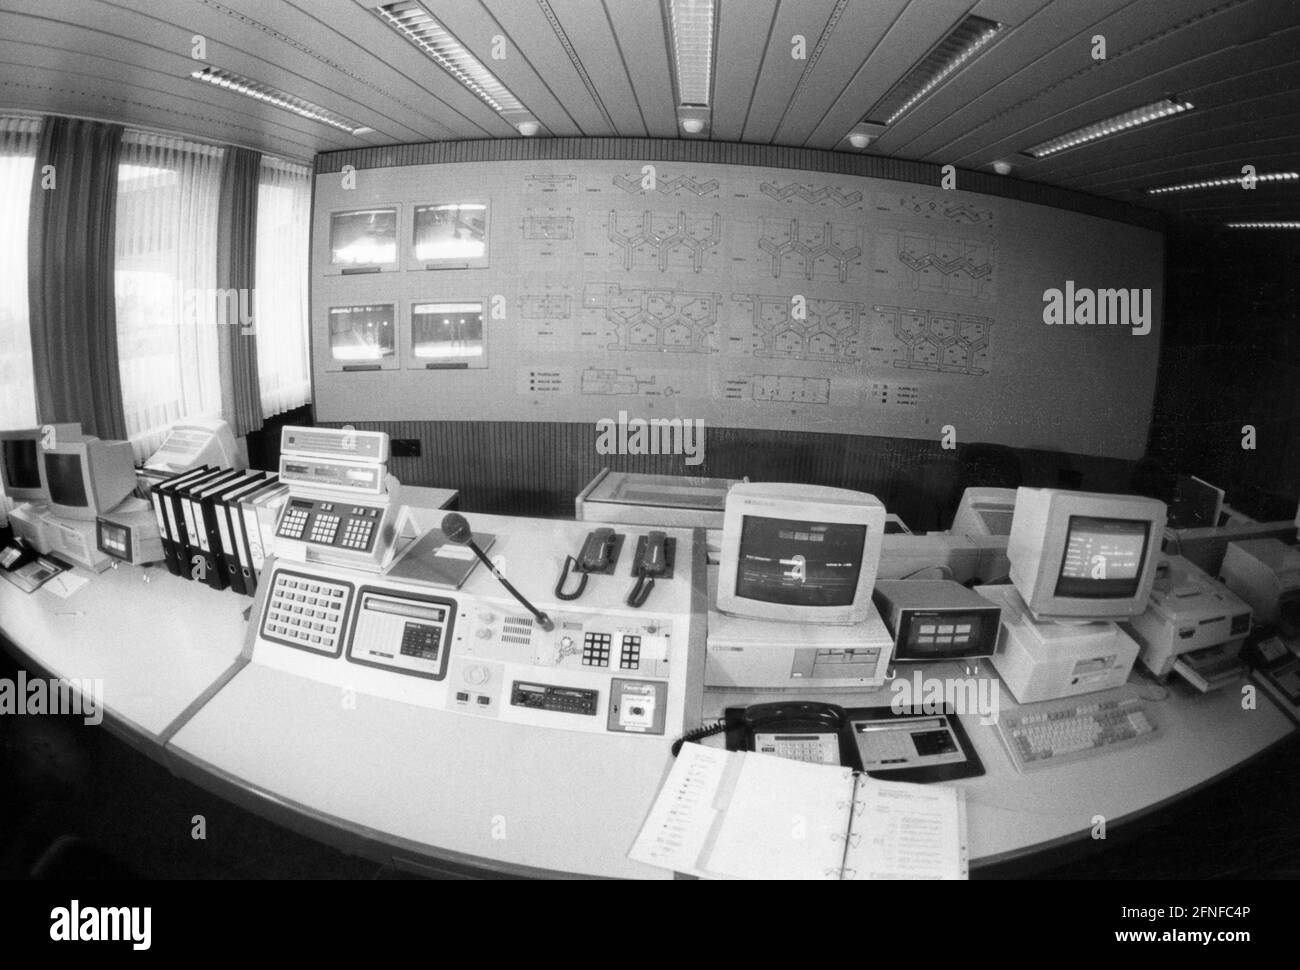 The computers in the control centre of the internal security of the Federal Office for the Protection of the Constitution in Cologne. The office has good technical equipment with computers, telephones and a large control centre. [automated translation] Stock Photo